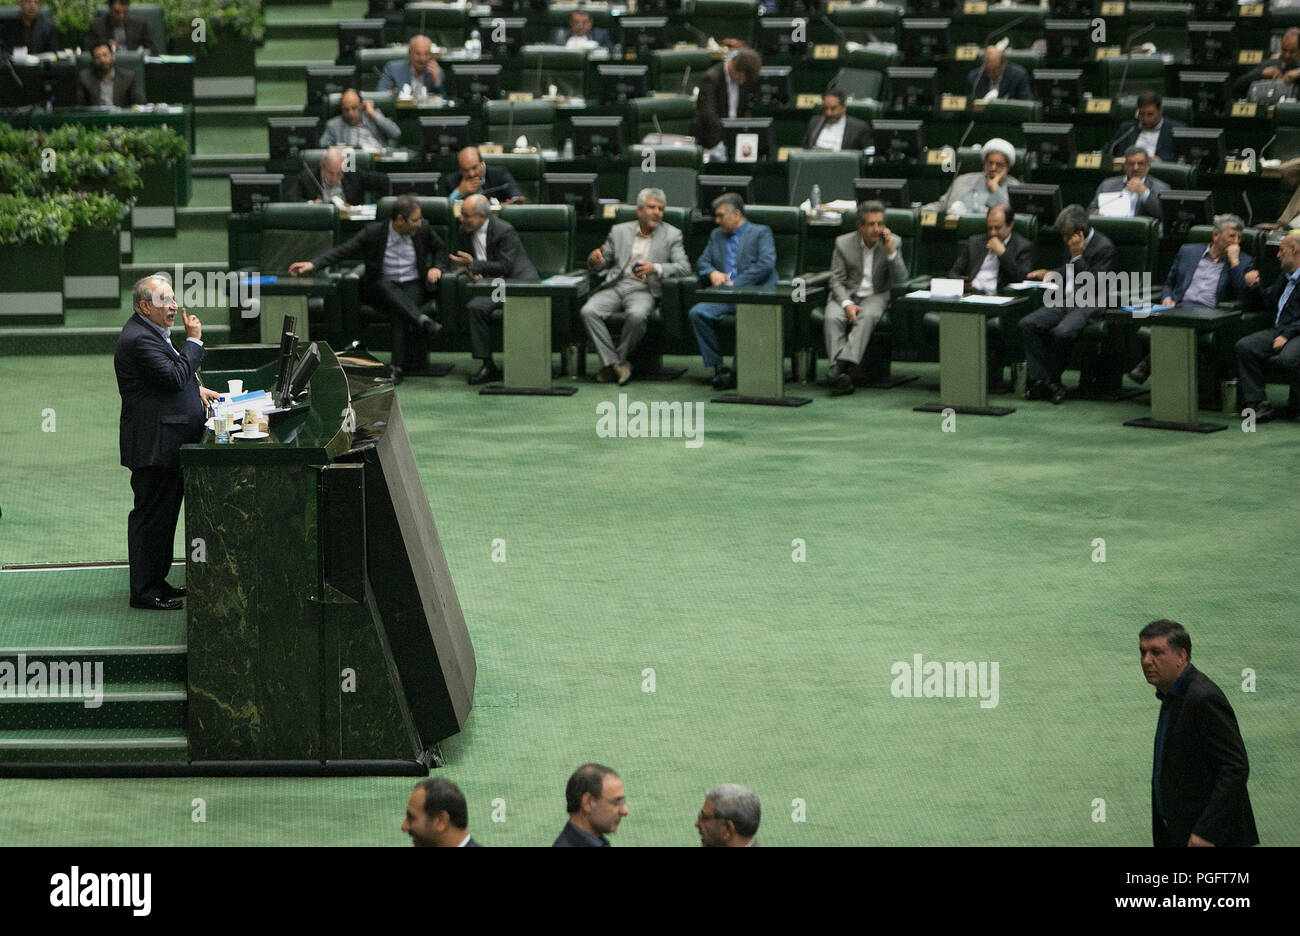 Tehran, Iran. 26th Aug, 2018. Massoud Karbasian (L) speaks during his impeachment process at the Iranian Parliament in Tehran, Iran, Aug. 26, 2018. Iranian lawmakers on Sunday impeached minister of economic affairs and finance over his mismanagement of the current economic situation, official IRNA news agency reported. The former minister Massoud Karbasian lost vote of confidence in the parliament, with 137 out of 260 votes in favor of his impeachment. Credit: Ahmad Halabisaz/Xinhua/Alamy Live News Stock Photo